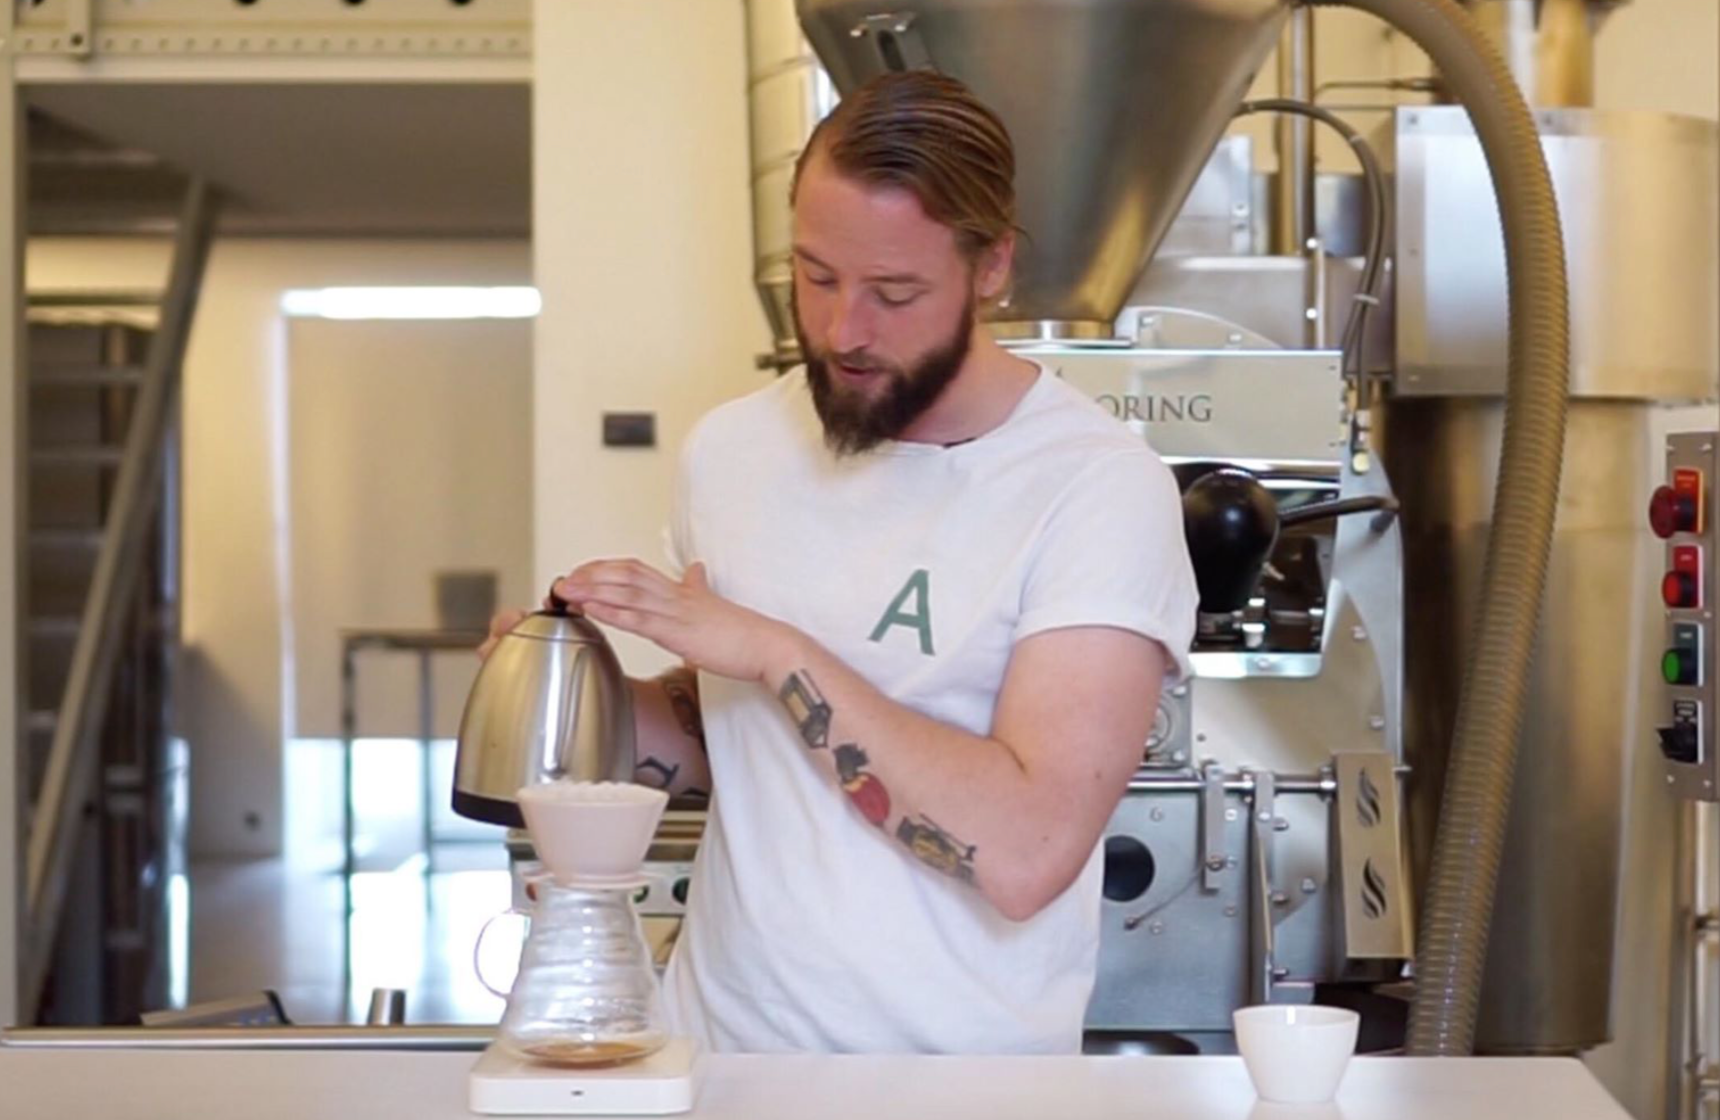 Training log #3 by Patrik Rolf - What is your favourite Coffee Grinder?